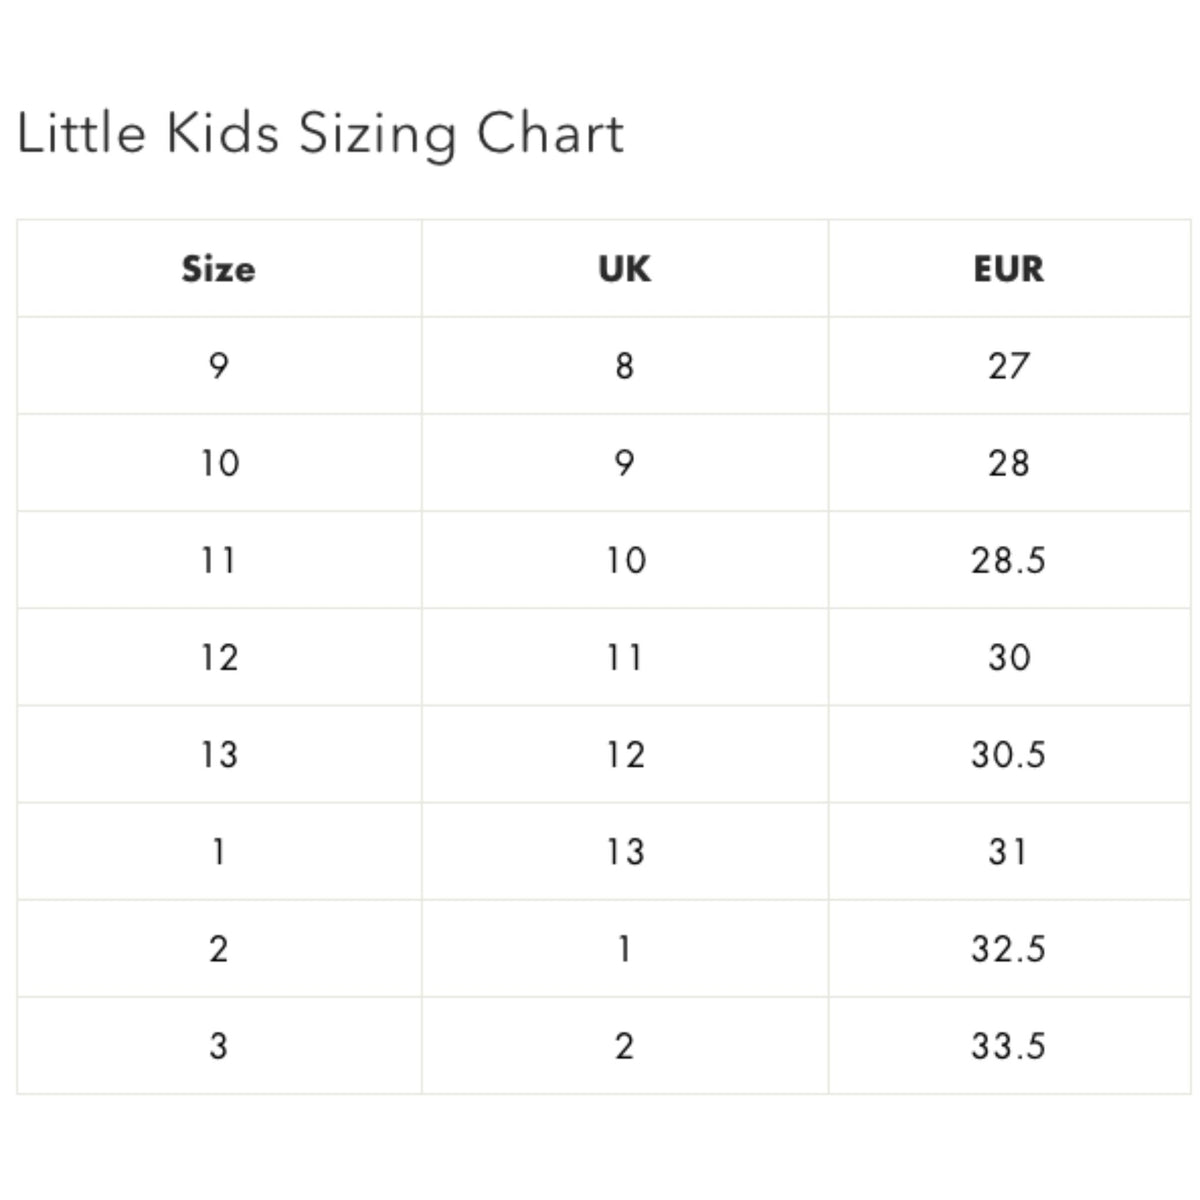 Sizing guide for small kids.